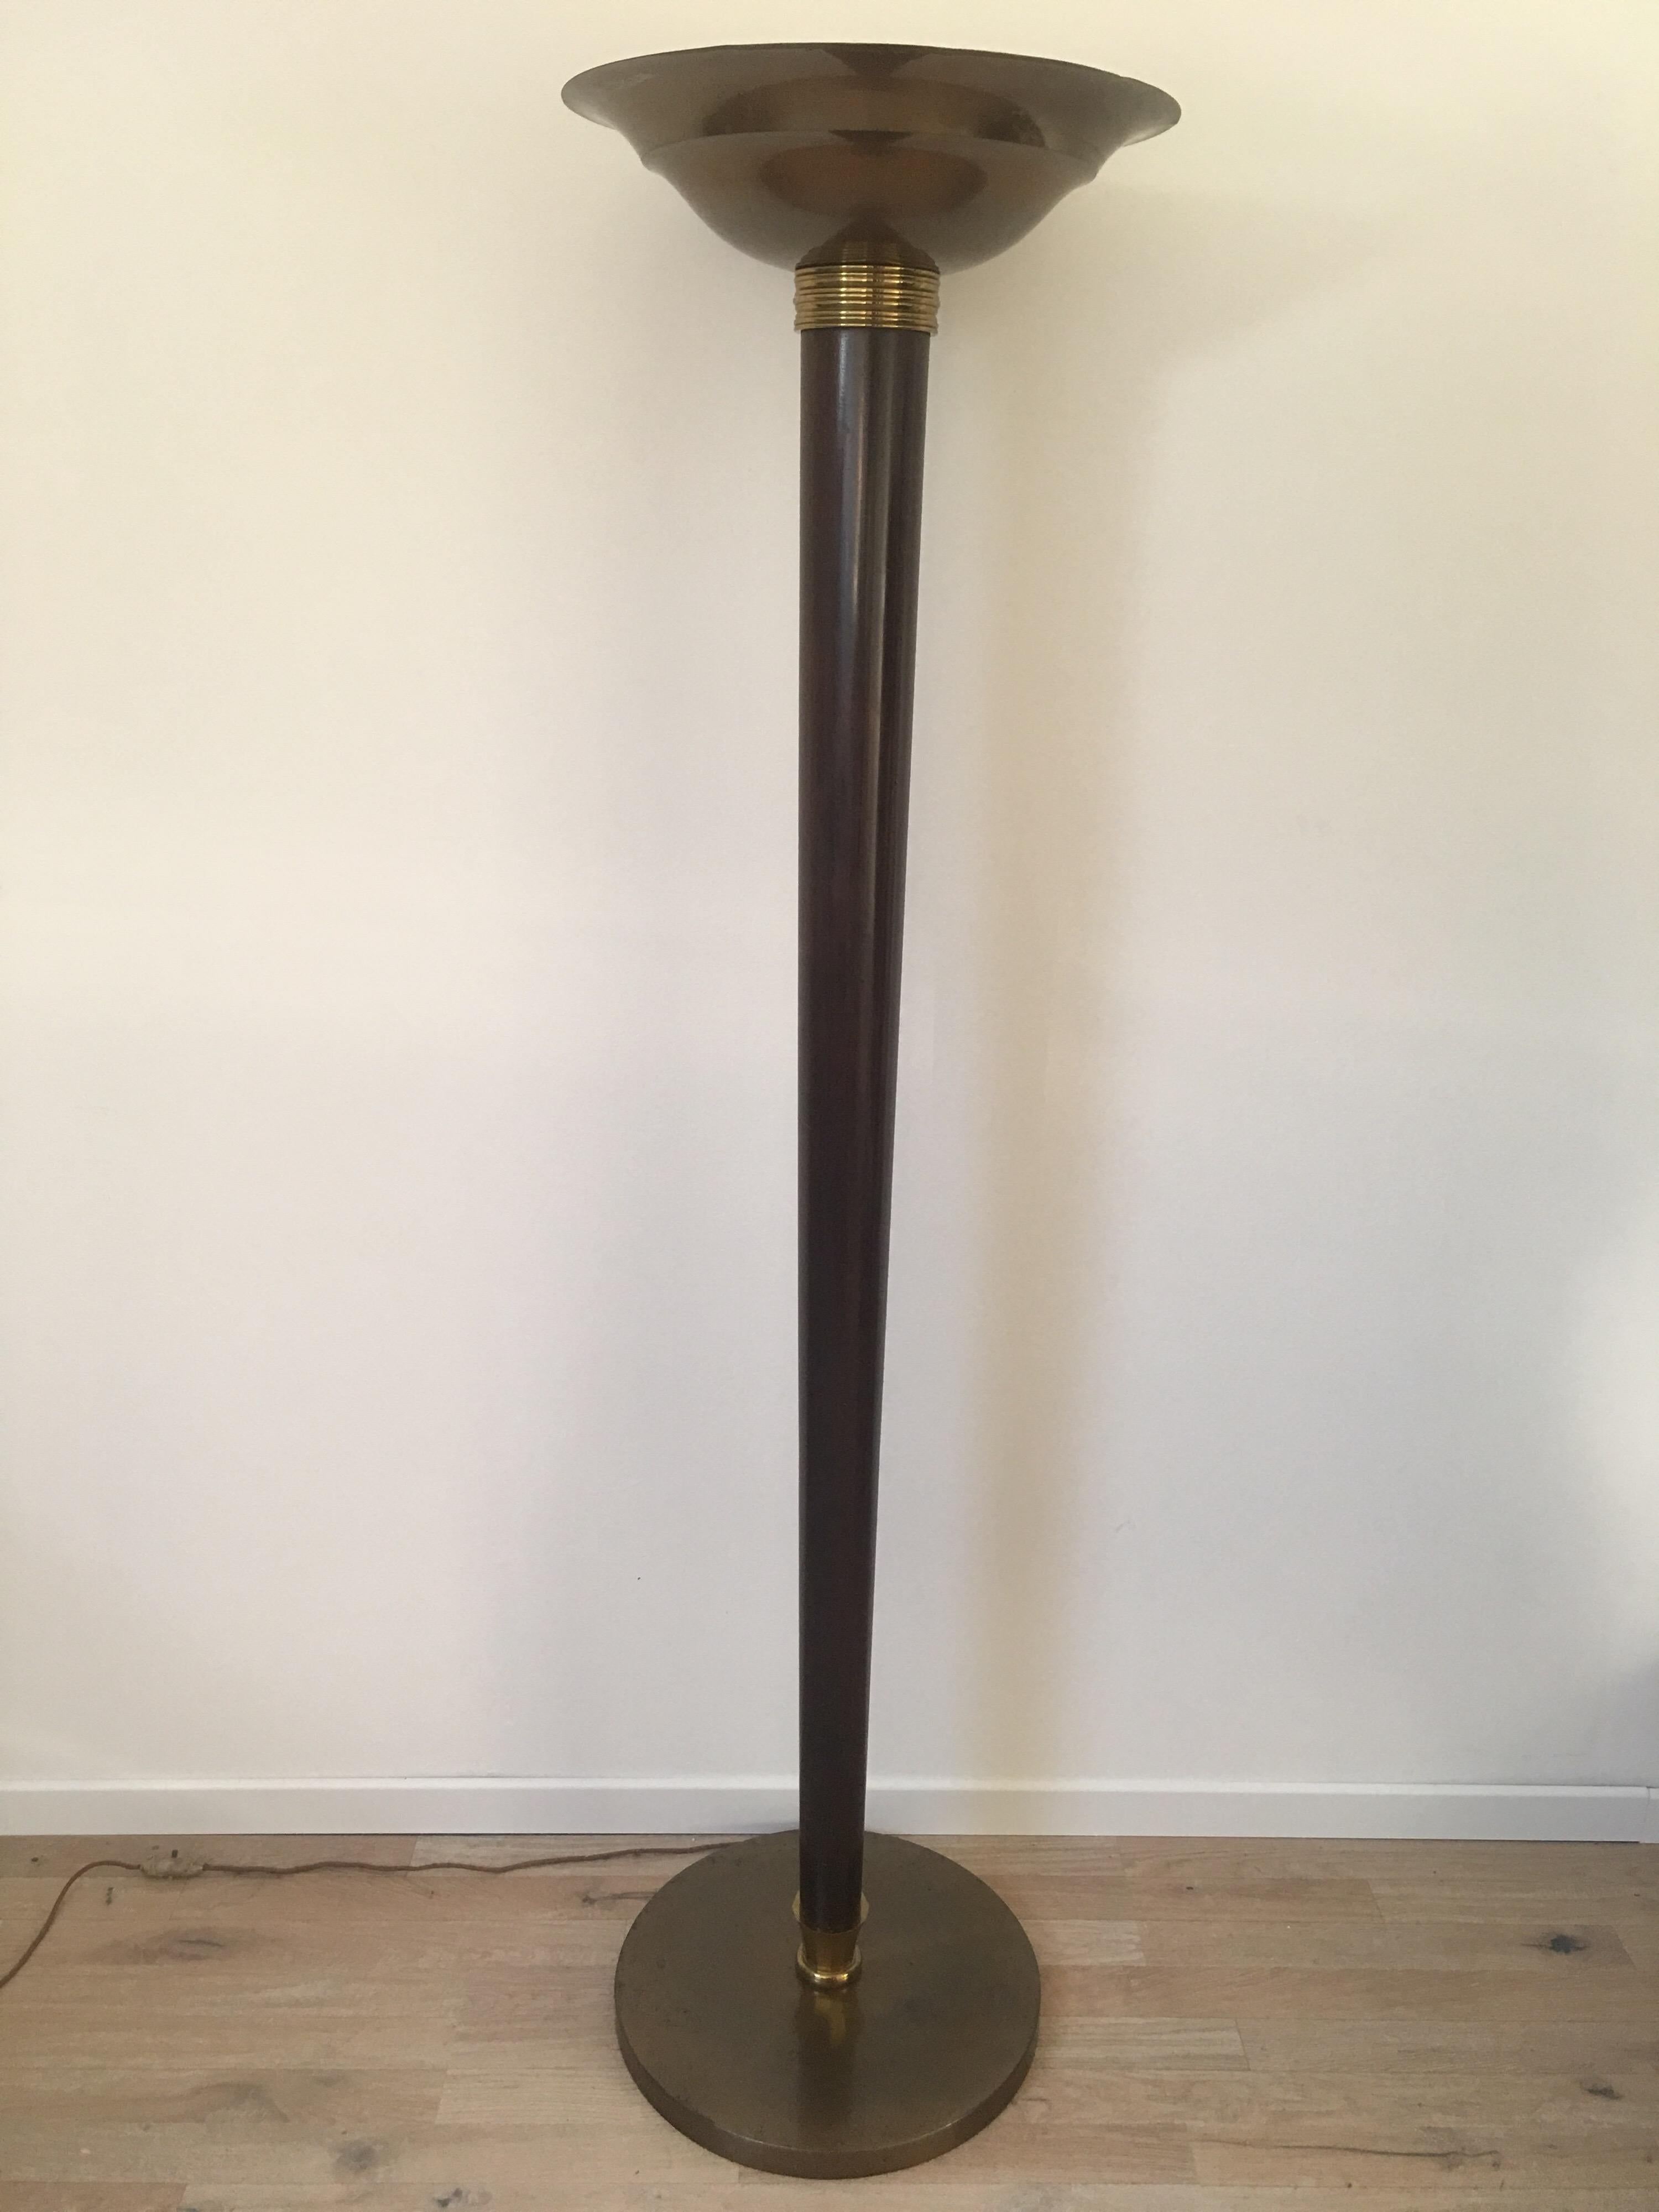 An original floor lamp wood and metal attributed to Genet and Michon, circa 1930s.
This is a rare example of French Art Deco lighting
Very good quality exotic wood and brass elements. The double patina golden brass and matte bronze makes it very